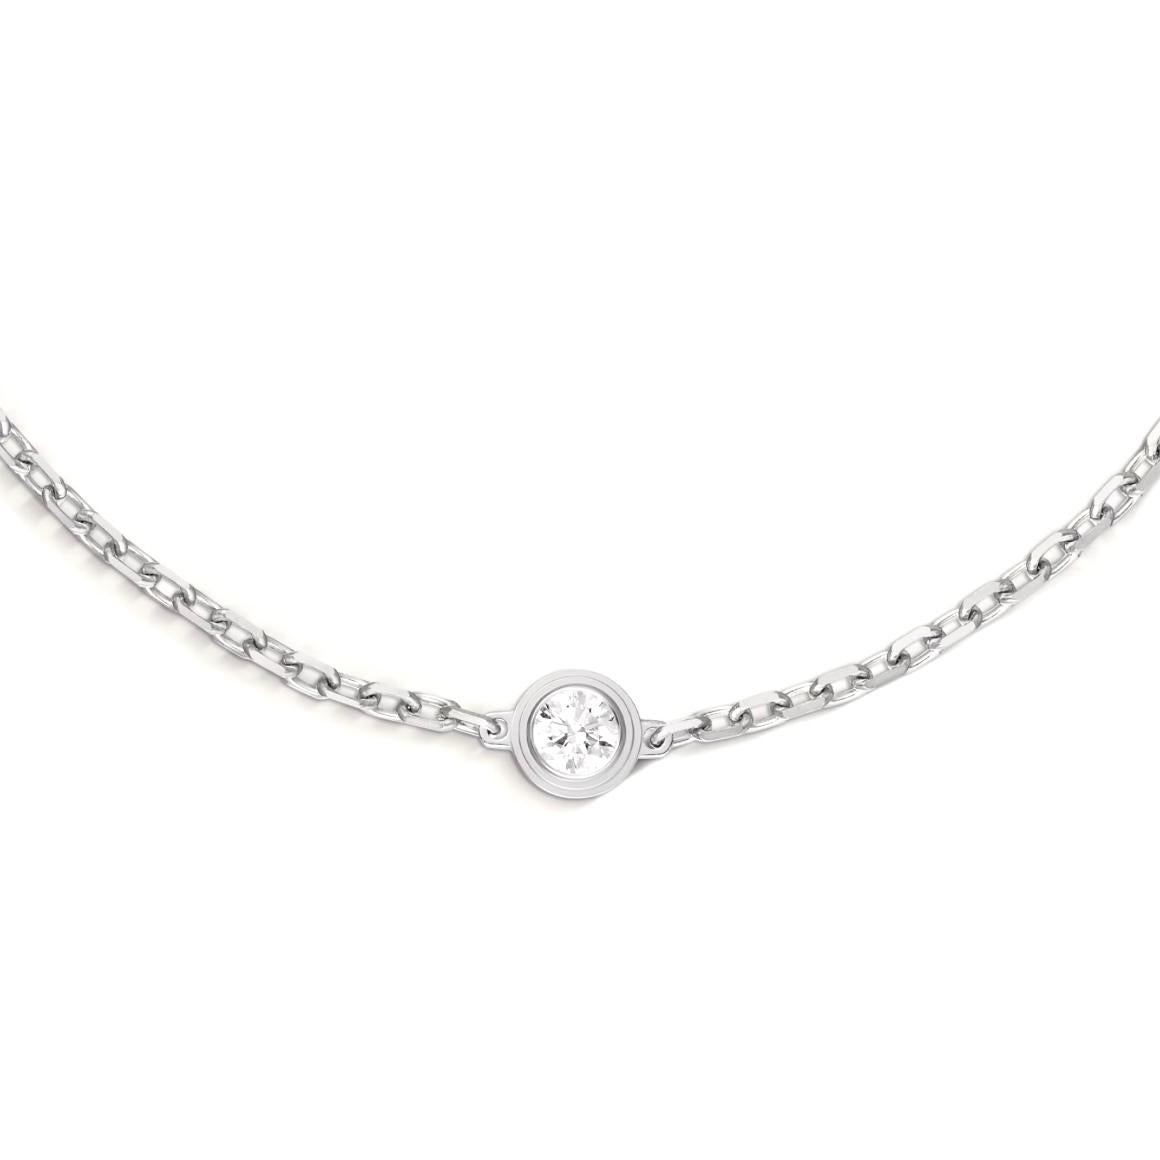 Designer: Cartier

Collection: d’Amour

Model Number: 0158329

Style: Bracelet

Metal: White Gold

Metal Purity: 18K

Stone: Diamond

Total Carat Weight: 0.04 ct

Length: 165 to 185 mm

Includes:  2 Year Brilliance Jewels Warranty

               